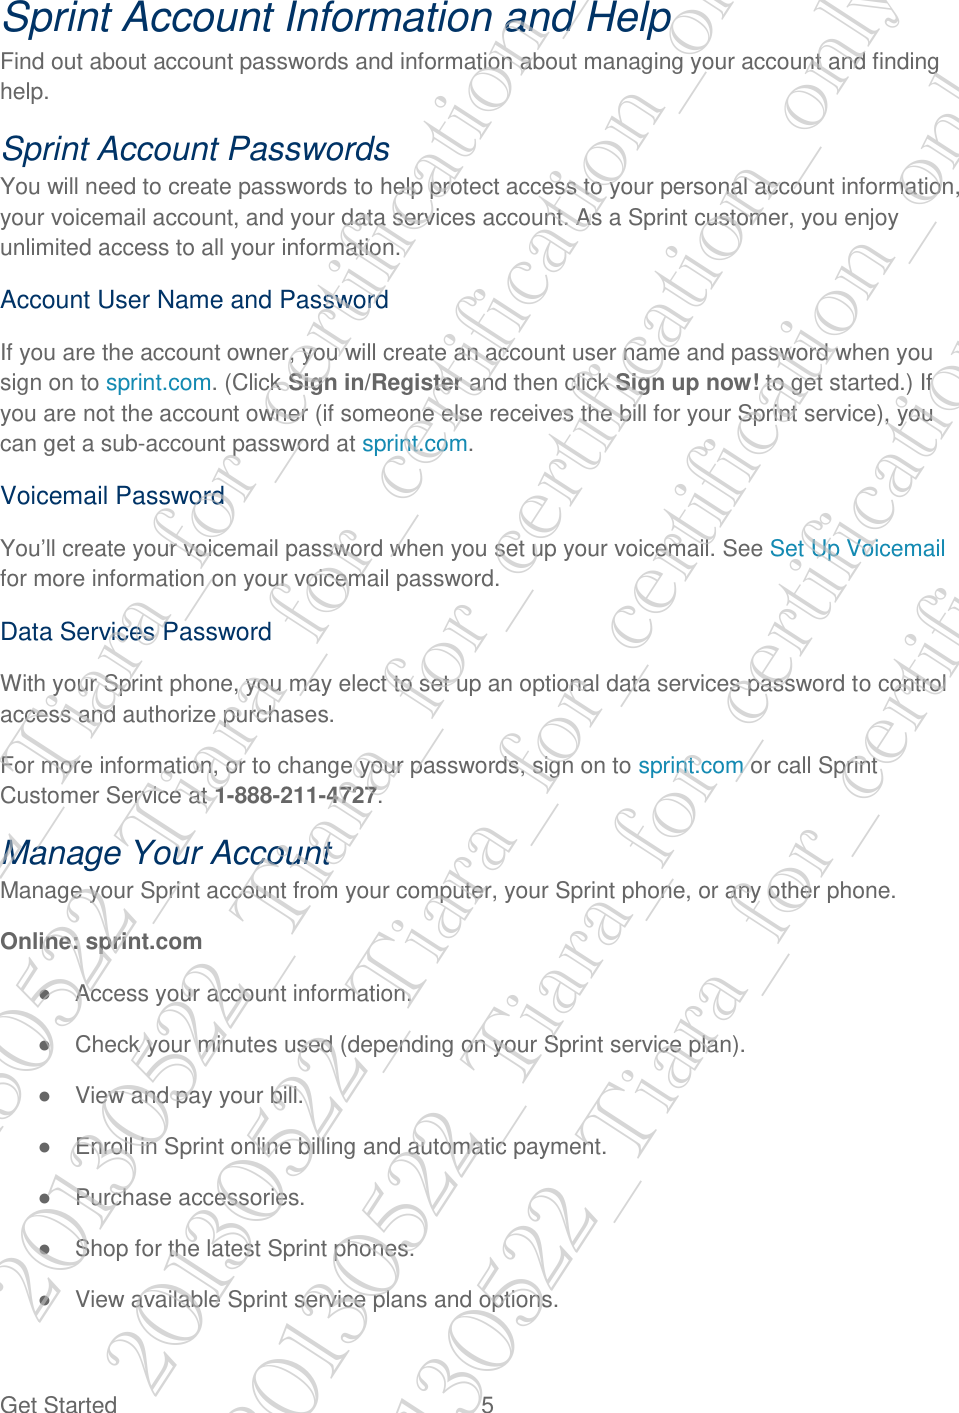  Get Started  5 Sprint Account Information and Help Find out about account passwords and information about managing your account and finding help. Sprint Account Passwords You will need to create passwords to help protect access to your personal account information, your voicemail account, and your data services account. As a Sprint customer, you enjoy unlimited access to all your information. Account User Name and Password If you are the account owner, you will create an account user name and password when you sign on to sprint.com. (Click Sign in/Register and then click Sign up now! to get started.) If you are not the account owner (if someone else receives the bill for your Sprint service), you can get a sub-account password at sprint.com. Voicemail Password You’ll create your voicemail password when you set up your voicemail. See Set Up Voicemail for more information on your voicemail password. Data Services Password With your Sprint phone, you may elect to set up an optional data services password to control access and authorize purchases. For more information, or to change your passwords, sign on to sprint.com or call Sprint Customer Service at 1-888-211-4727. Manage Your Account Manage your Sprint account from your computer, your Sprint phone, or any other phone. Online: sprint.com ●  Access your account information. ●  Check your minutes used (depending on your Sprint service plan). ●  View and pay your bill. ●  Enroll in Sprint online billing and automatic payment. ●  Purchase accessories. ●  Shop for the latest Sprint phones. ●  View available Sprint service plans and options. 20130522_Tiara_for_certification_only 20130522_Tiara_for_certification_only 20130522_Tiara_for_certification_only 20130522_Tiara_for_certification_only 20130522_Tiara_for_certification_only 20130522_Tiara_for_certification_only